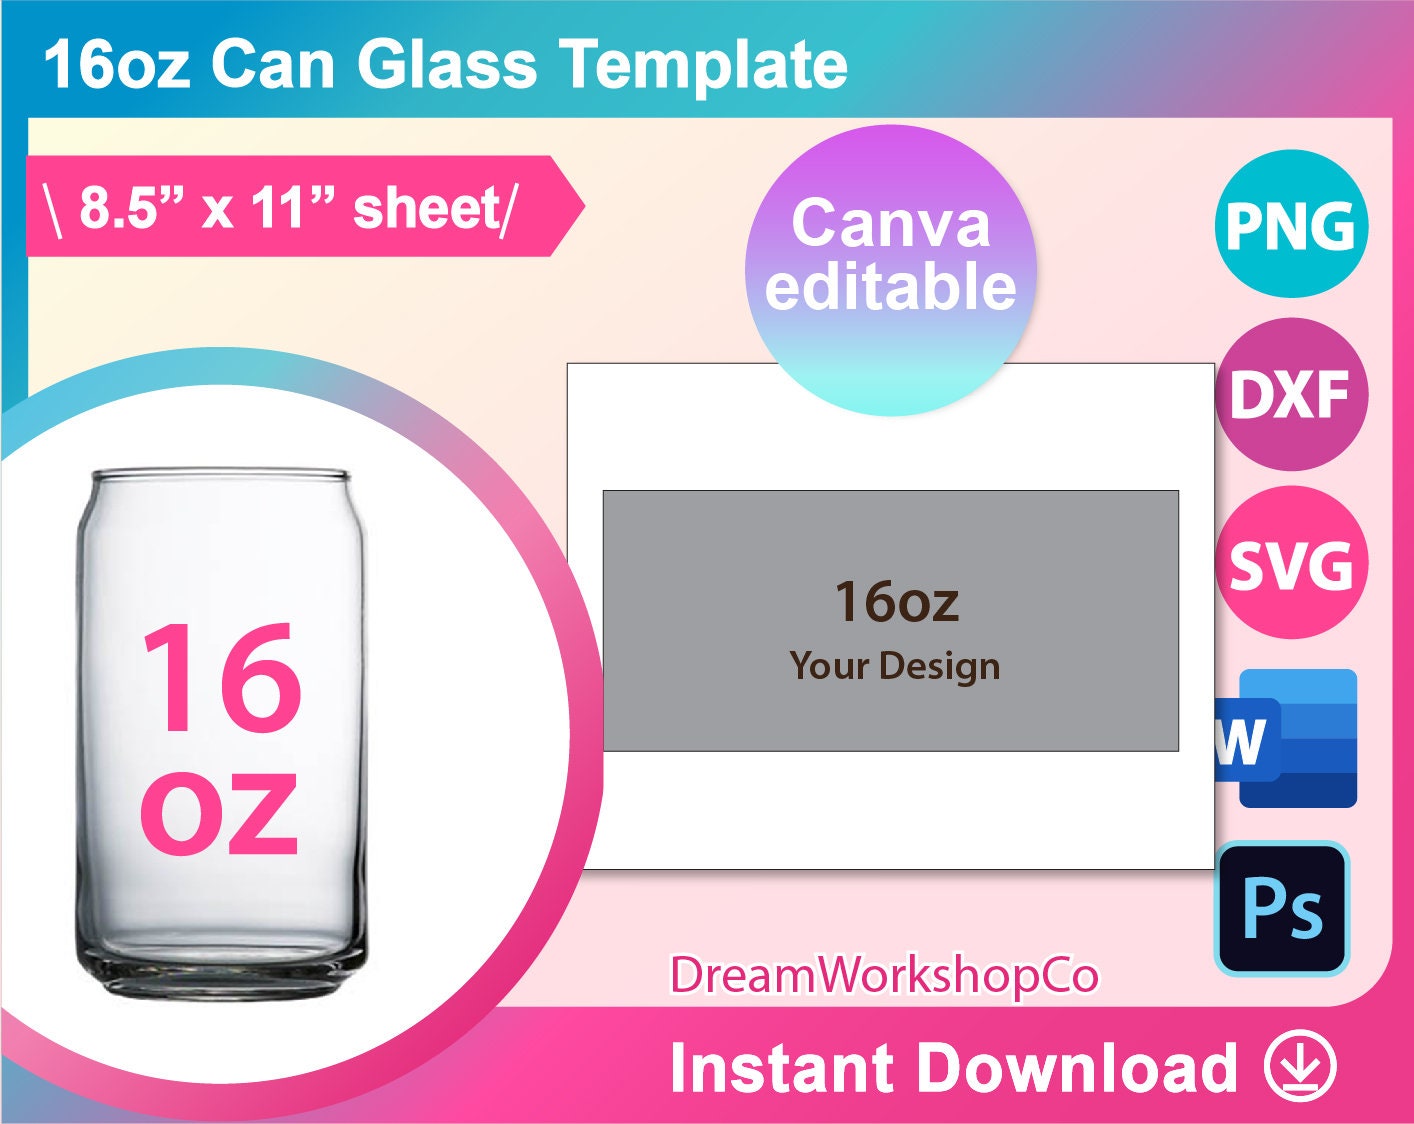 How to Make a Sublimation Tumbler Template in Canva - Silhouette